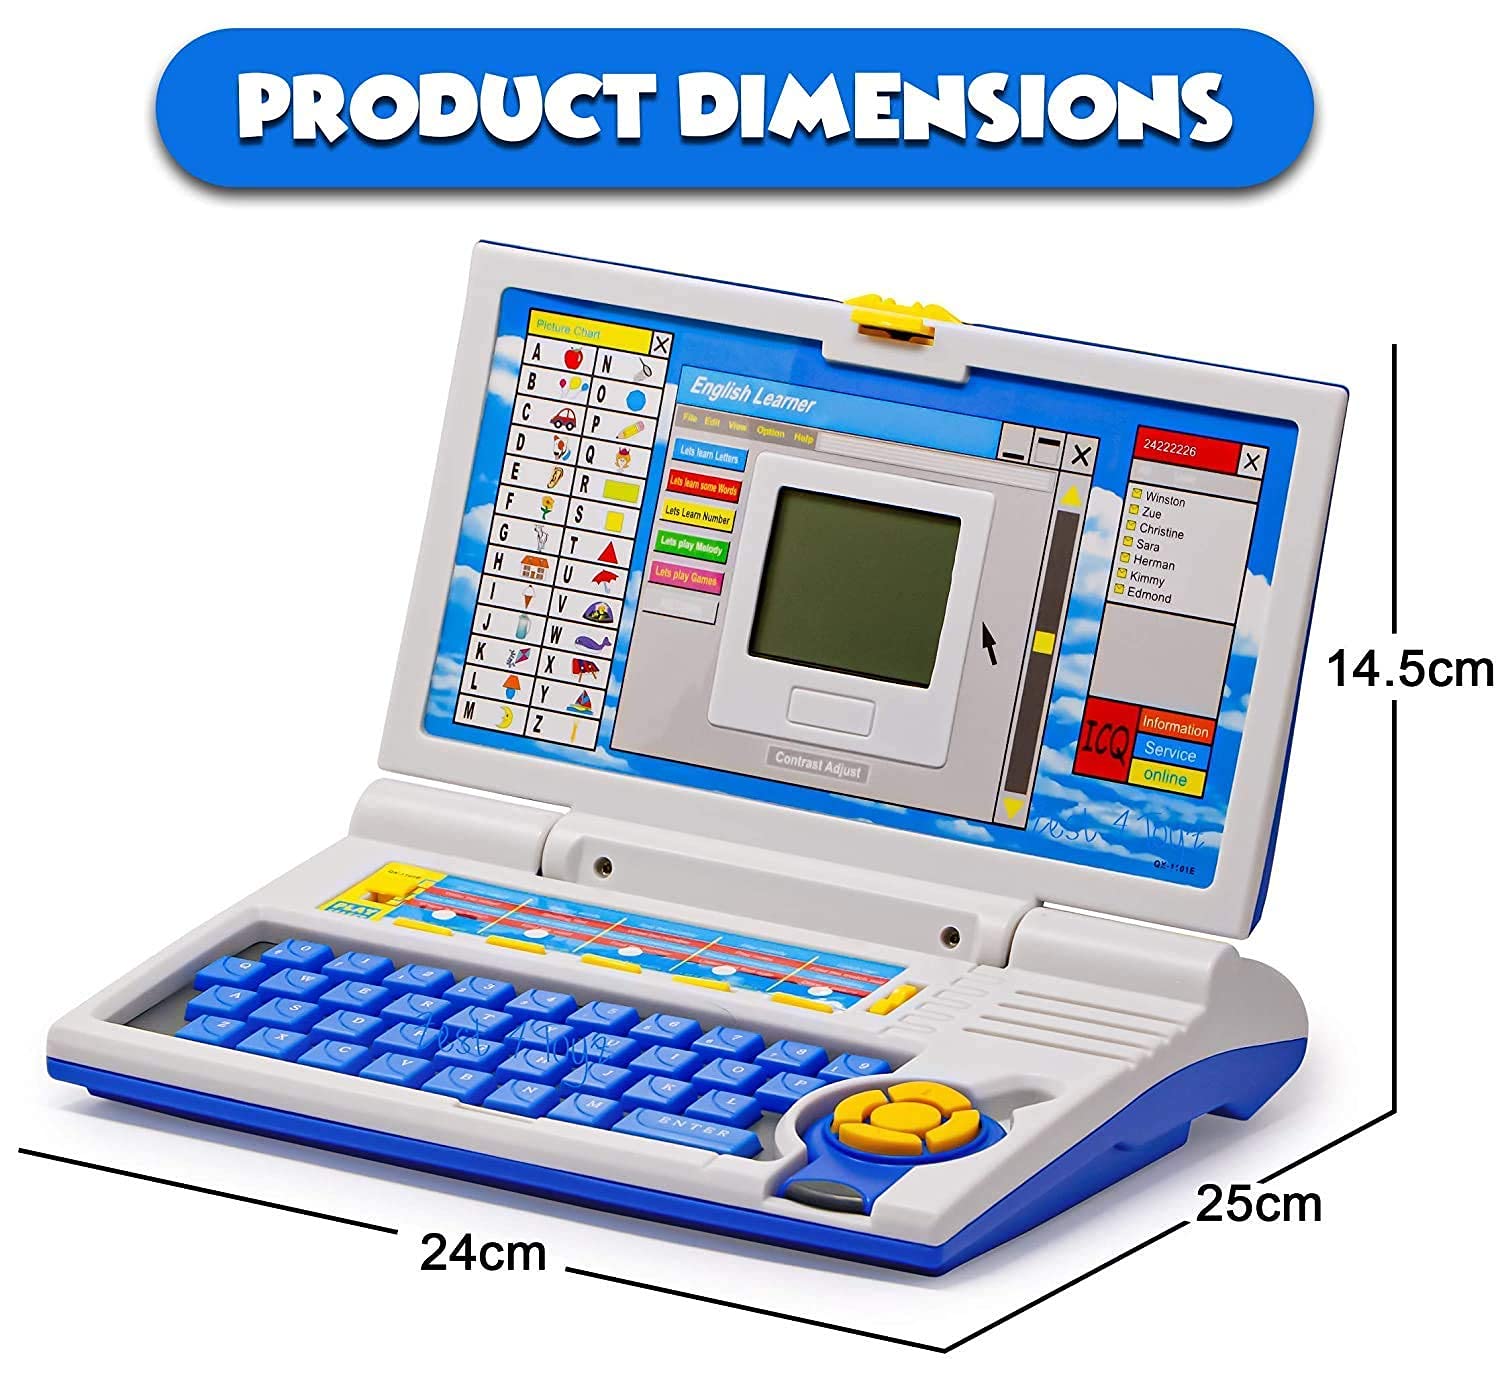 Educational English Educational and Learning Mode Laptop Computer for Kids